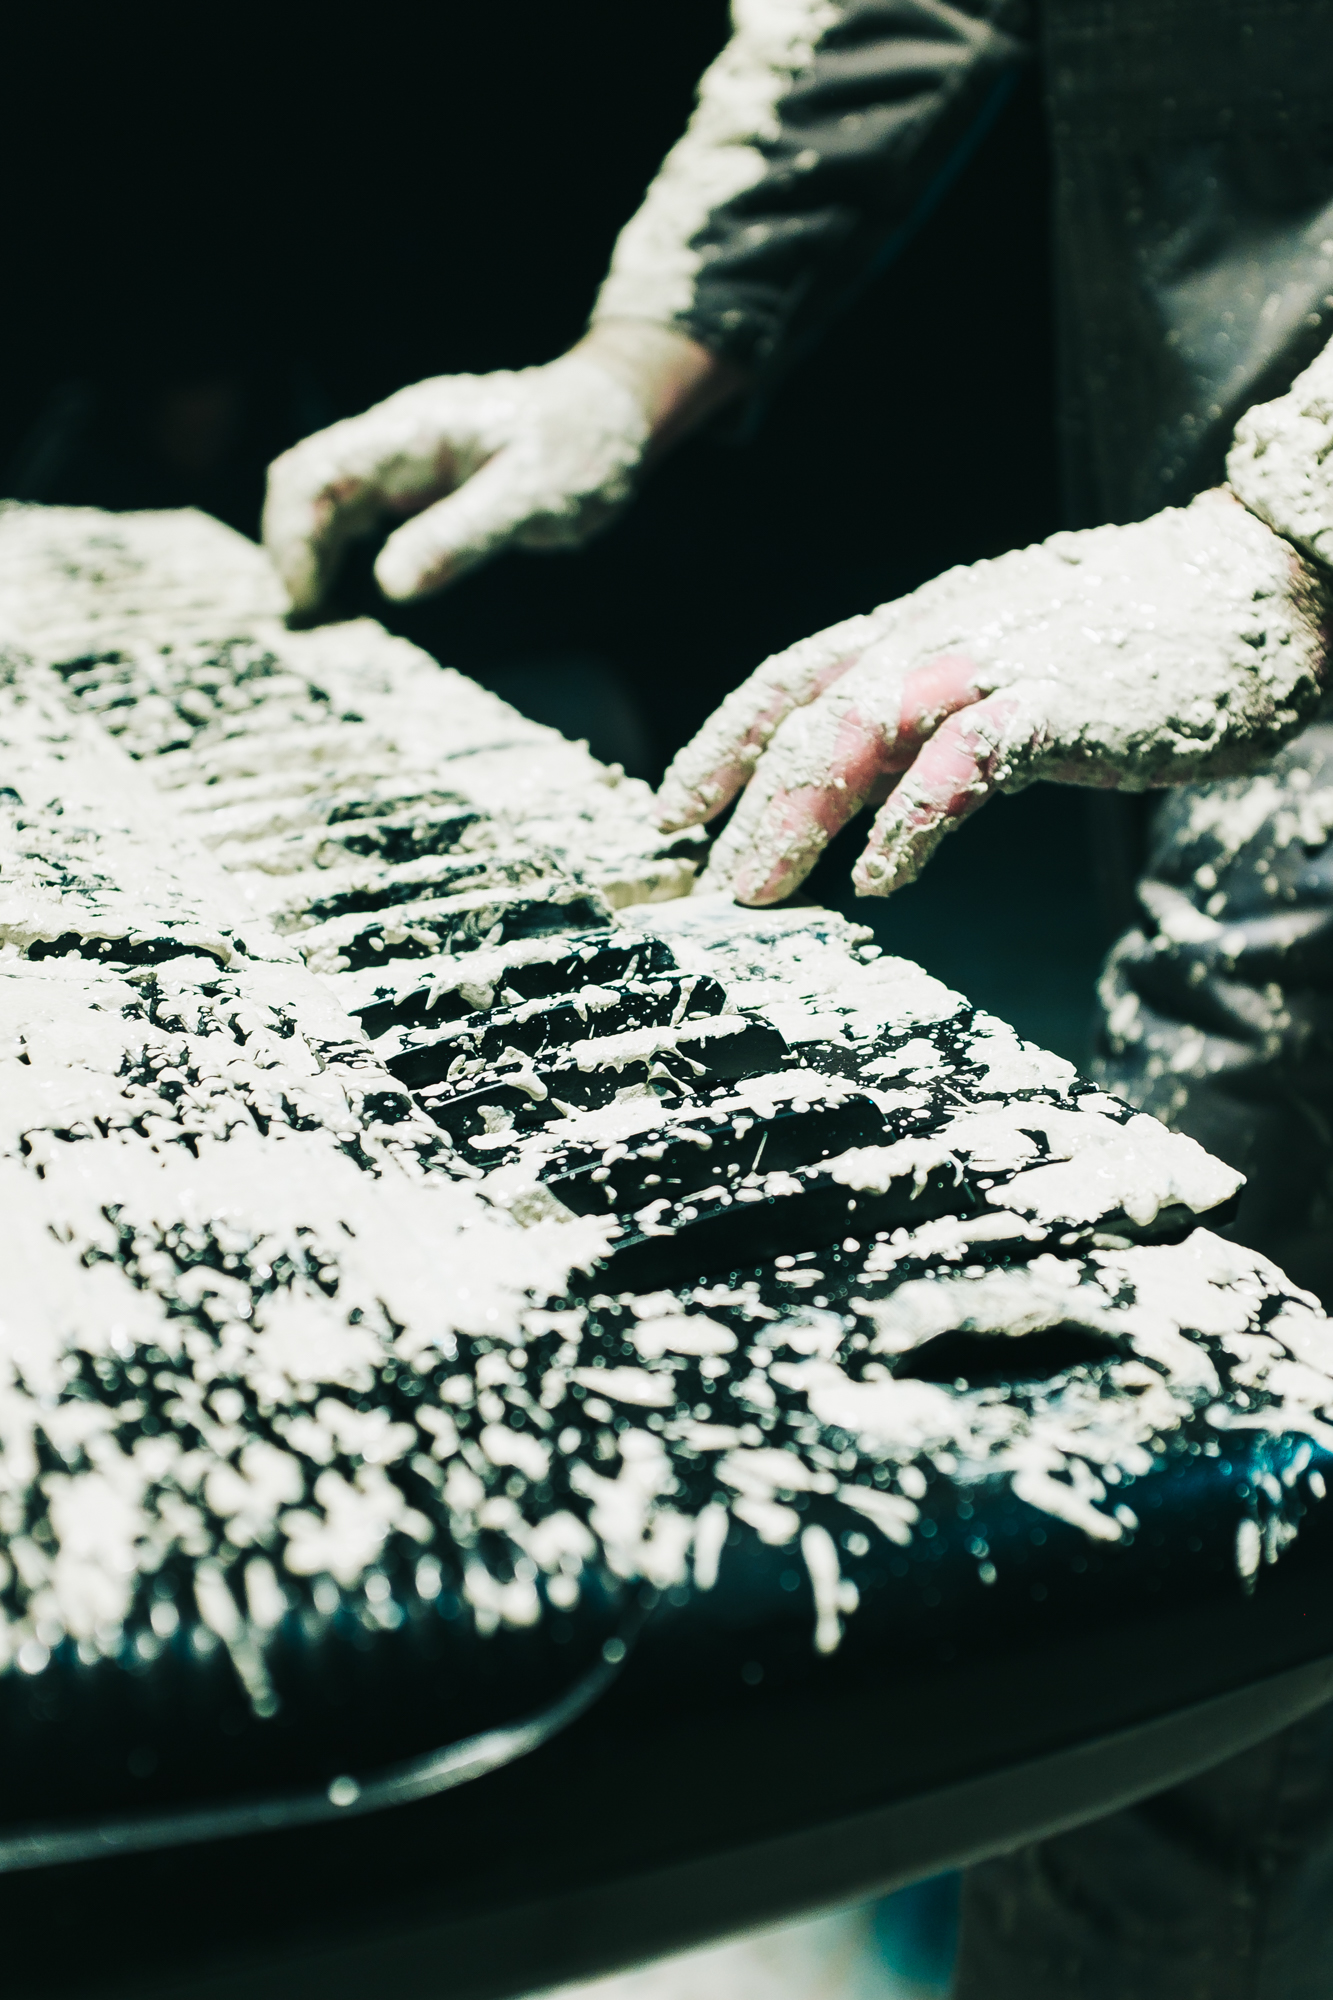 Mud covered keyboard with hands lit from above.